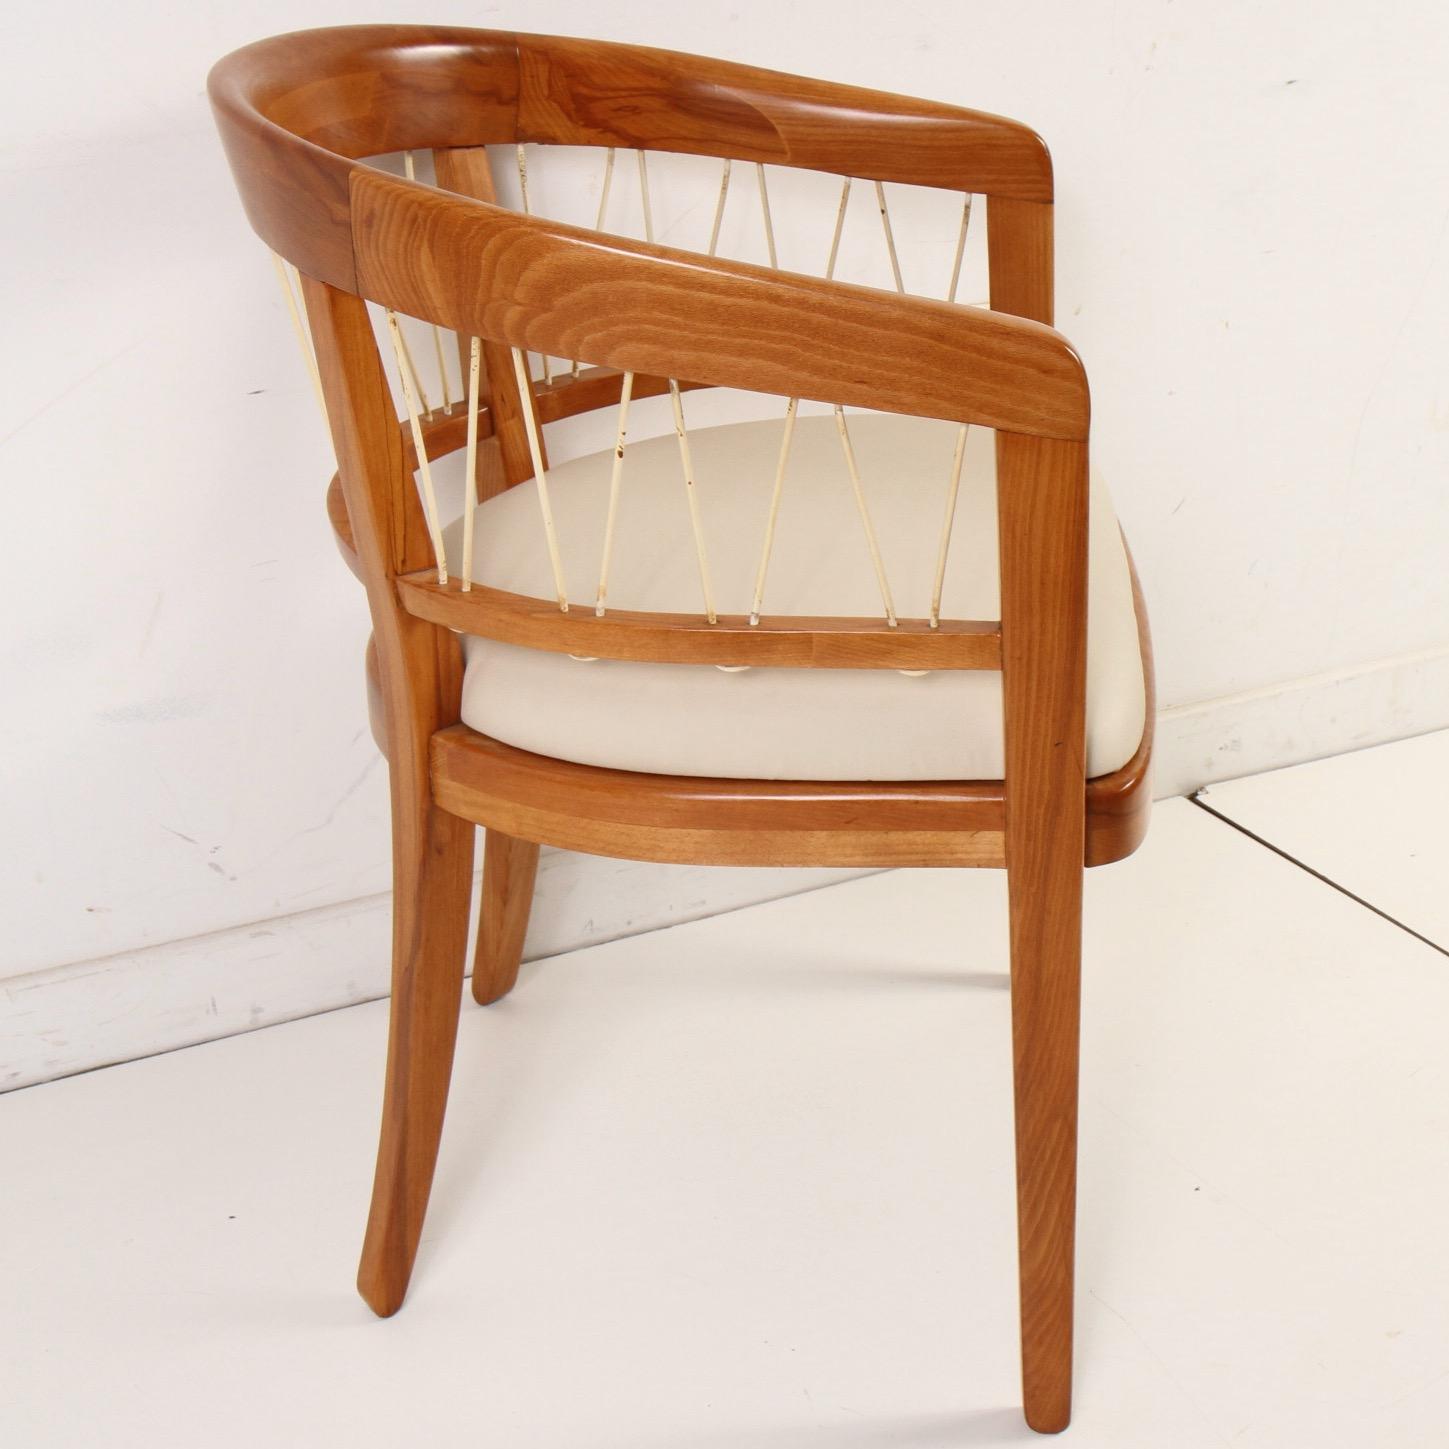 A Mid-Century Modern armchair designed by Edward Wormley for Drexel. This chair was from the Drexel's Precedent collection and Wormley's first work for a company other than Dunbar. Chair features a Naugahyde corded design and is newly upholstered in